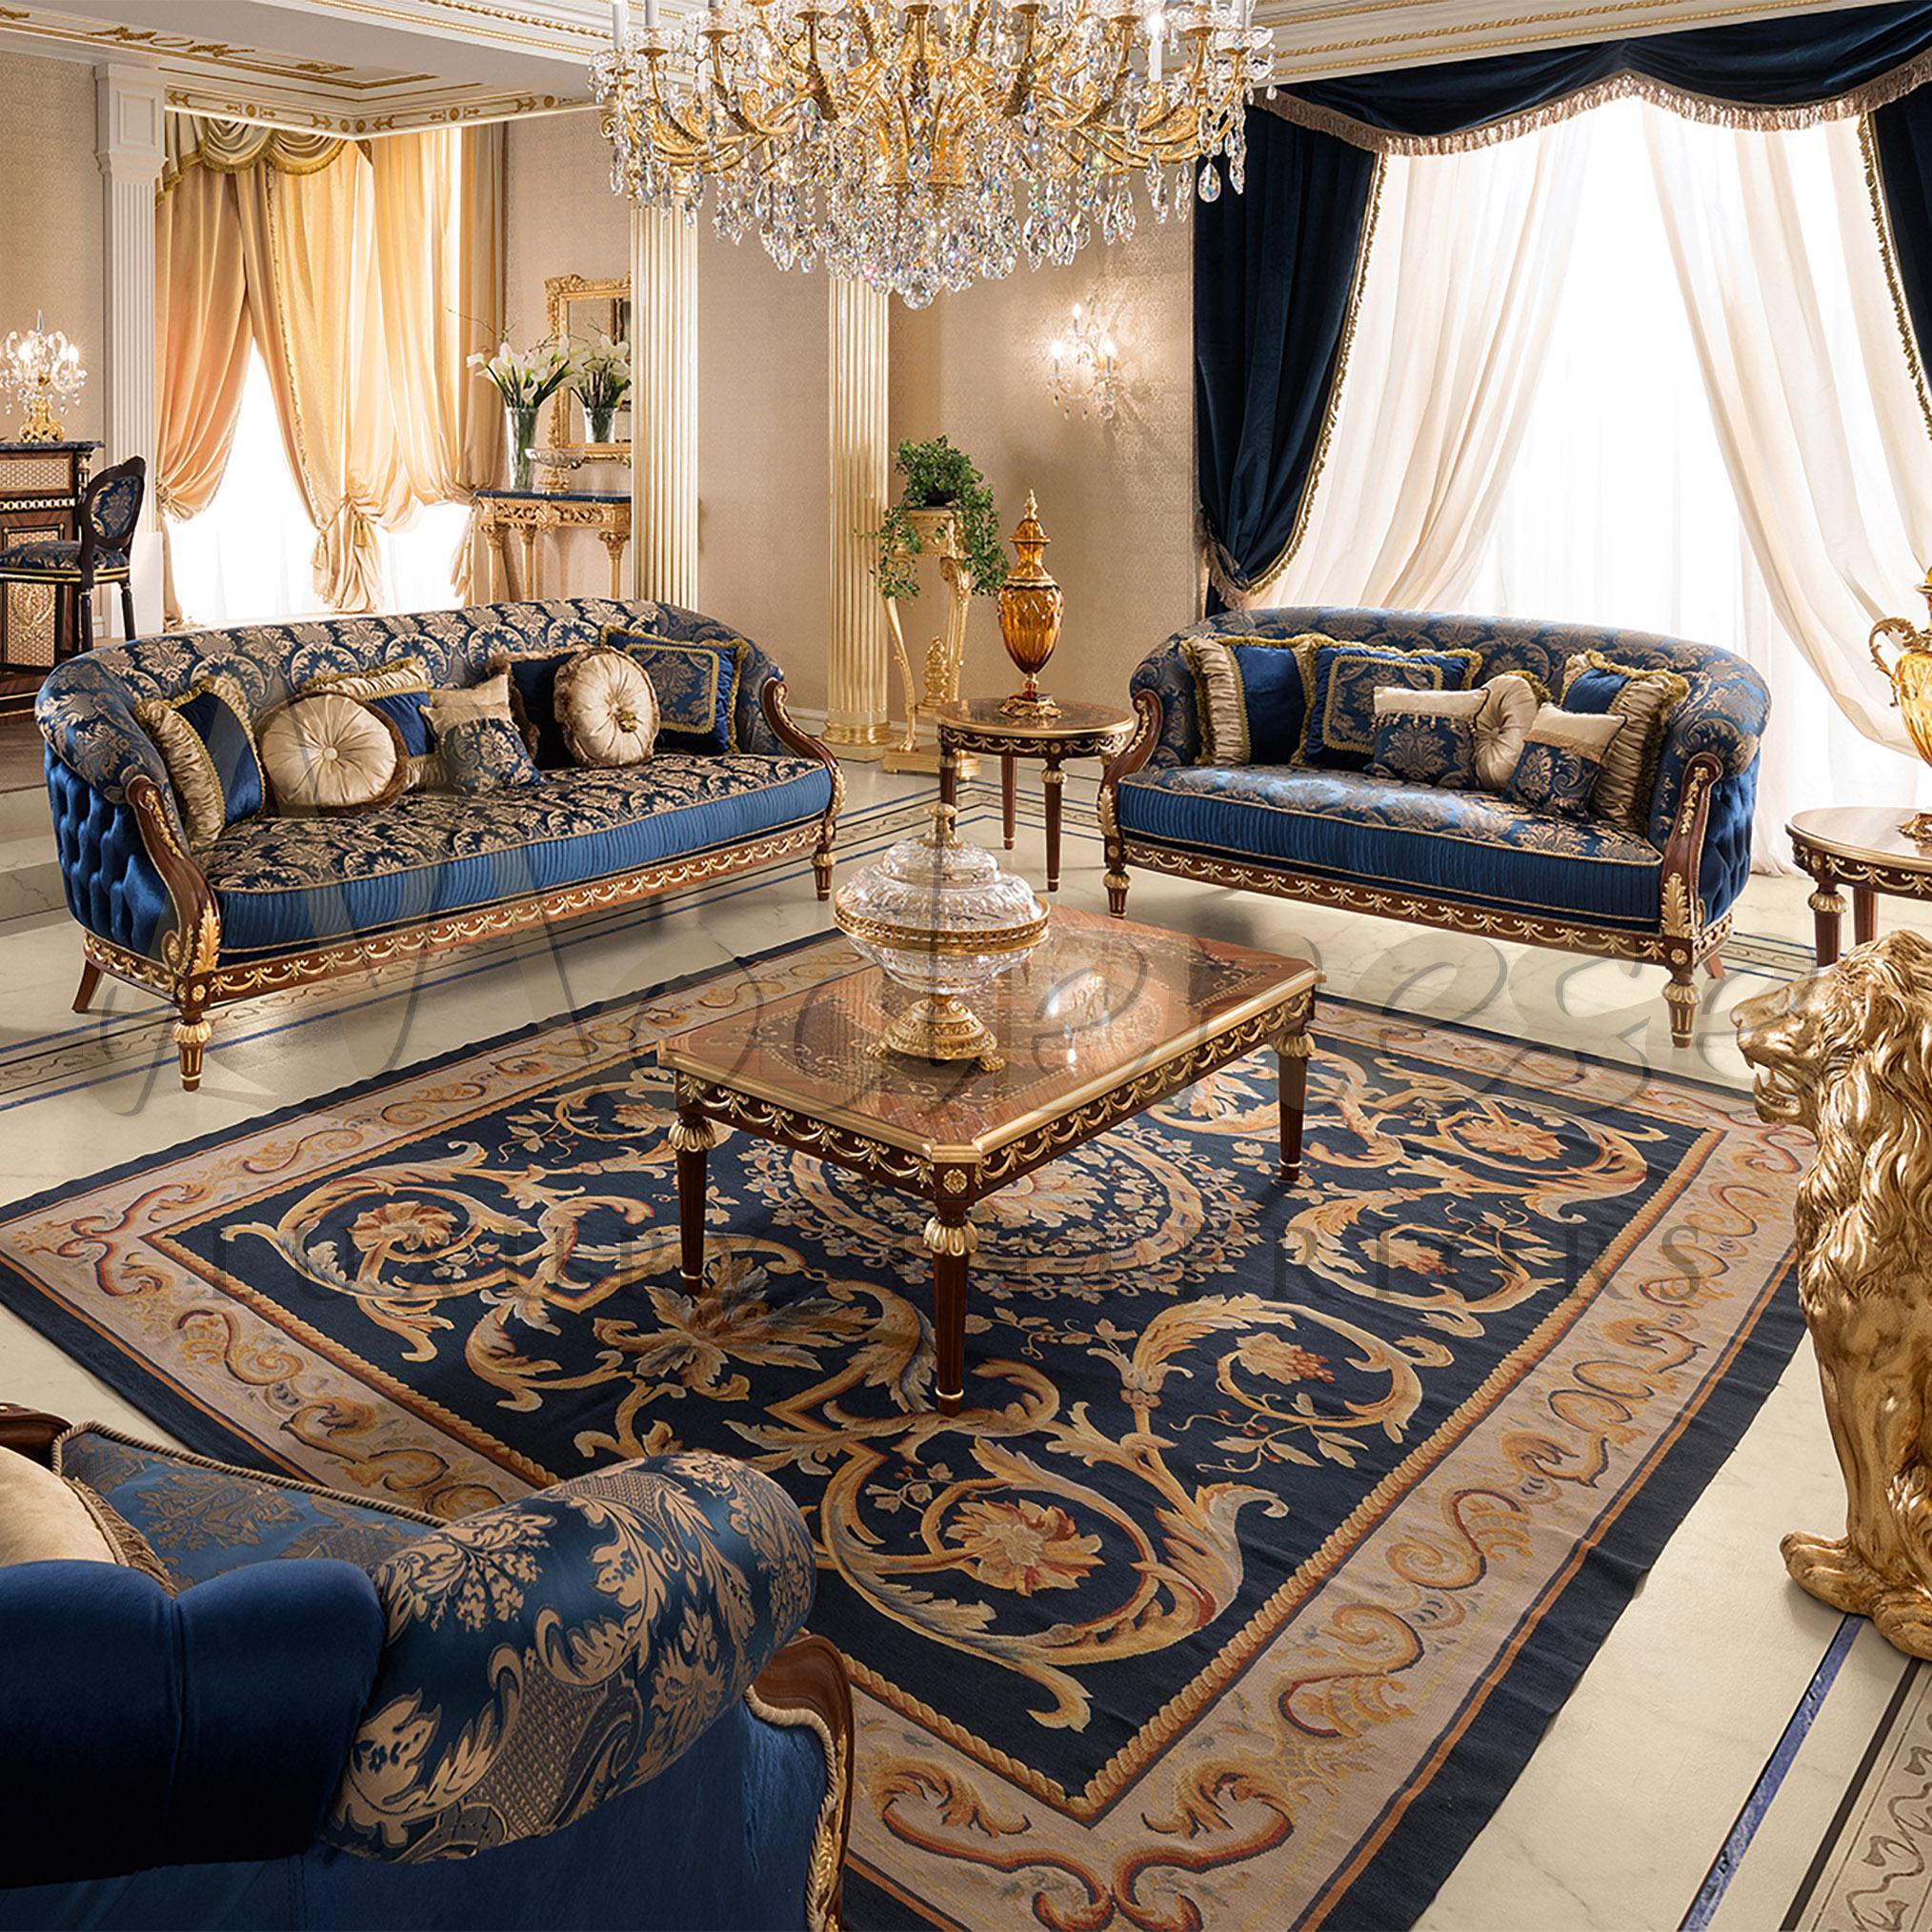 classic palace for furniture & decor